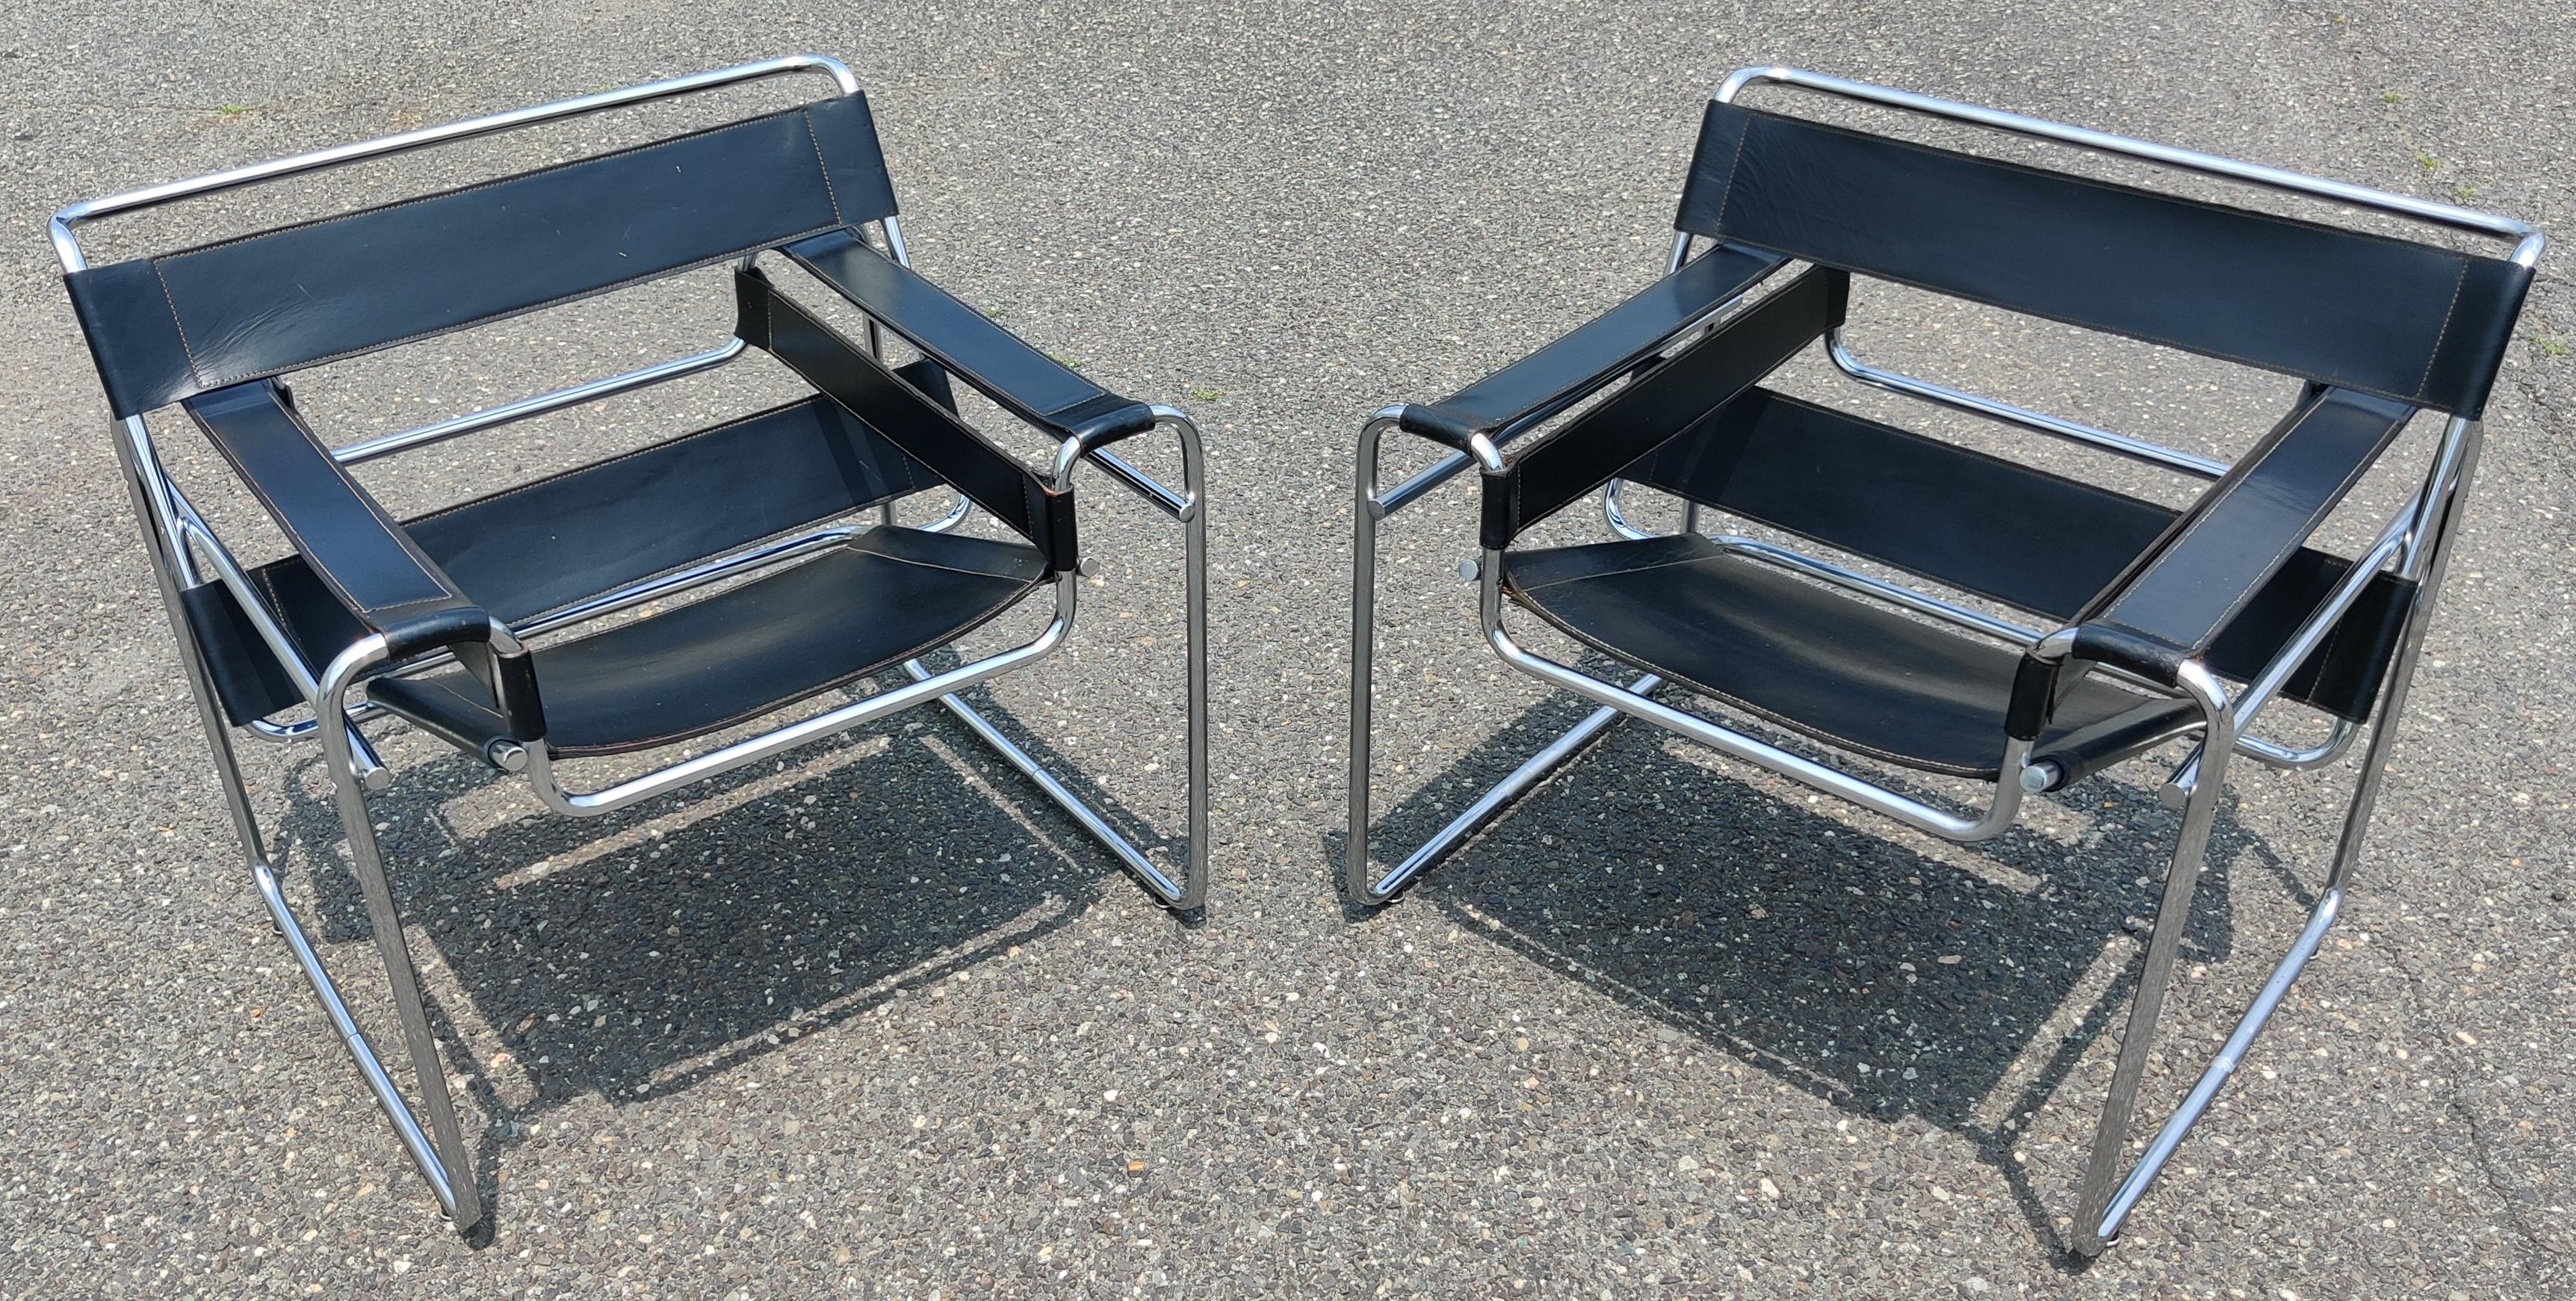 A rare pair of signed 1977 Marcel Breuer for Knoll pair of model B3 lounge chairs, also known as Wassily chairs. Originally designed for and named after Bauhaus artist Wassily Kandinsky circa 1926. These chairs are dated 1977. Notice the welded and